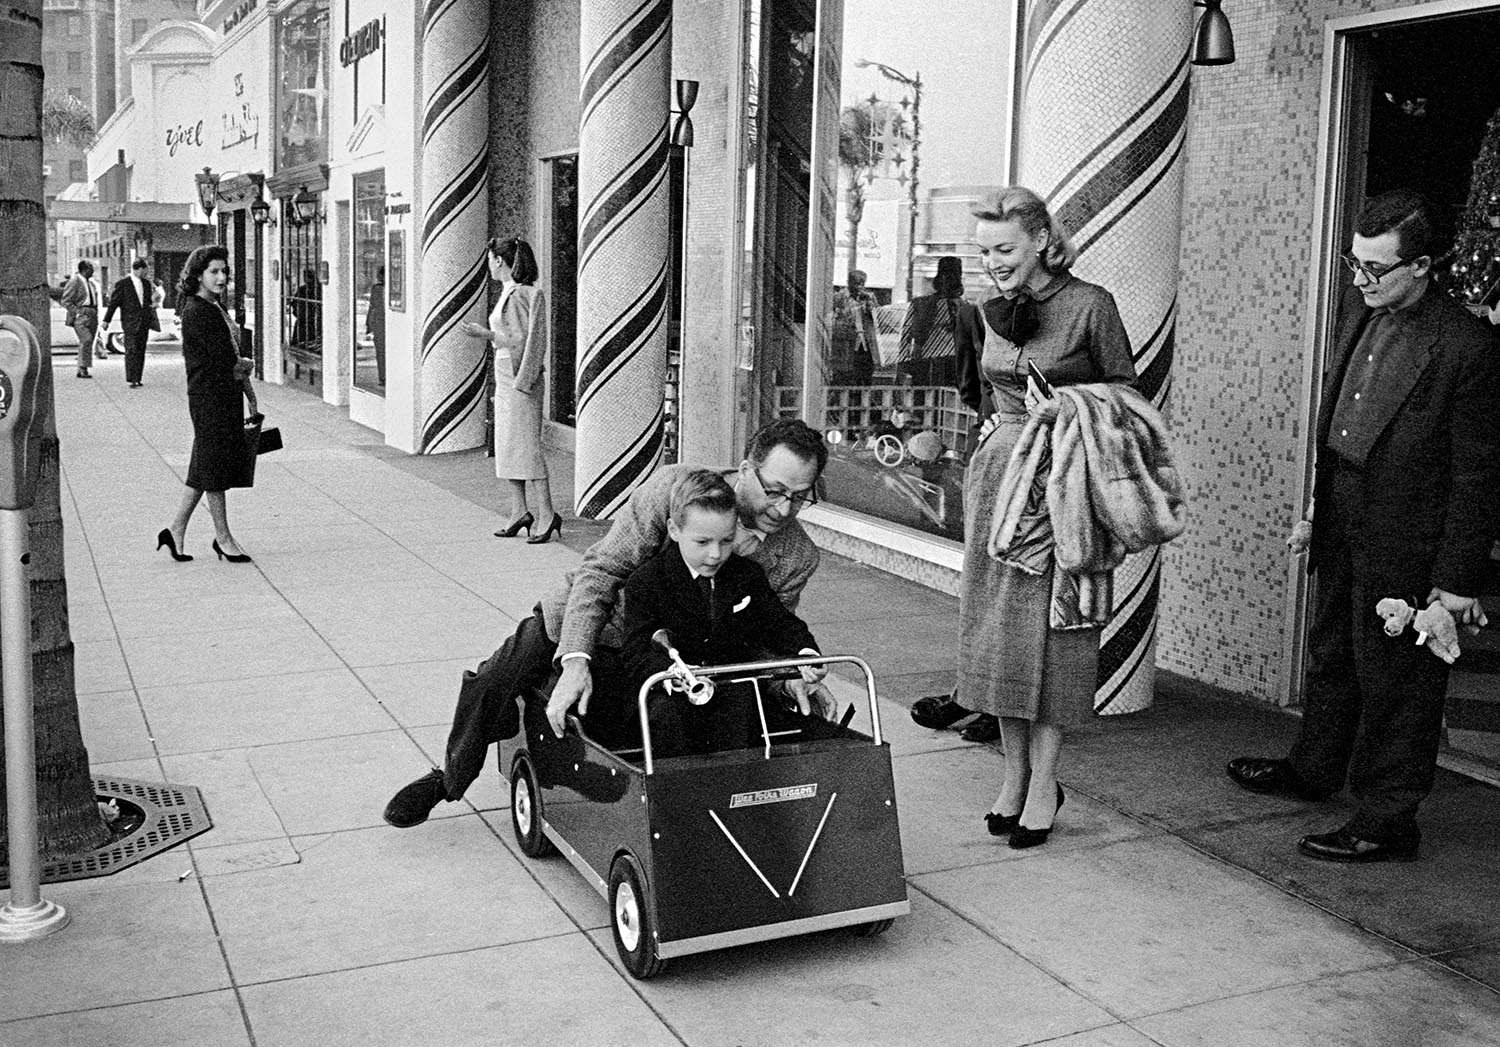   Uncle Bernie's Toy Menagerie, Rodeo Drive, Beverly Hills, California, 1959  